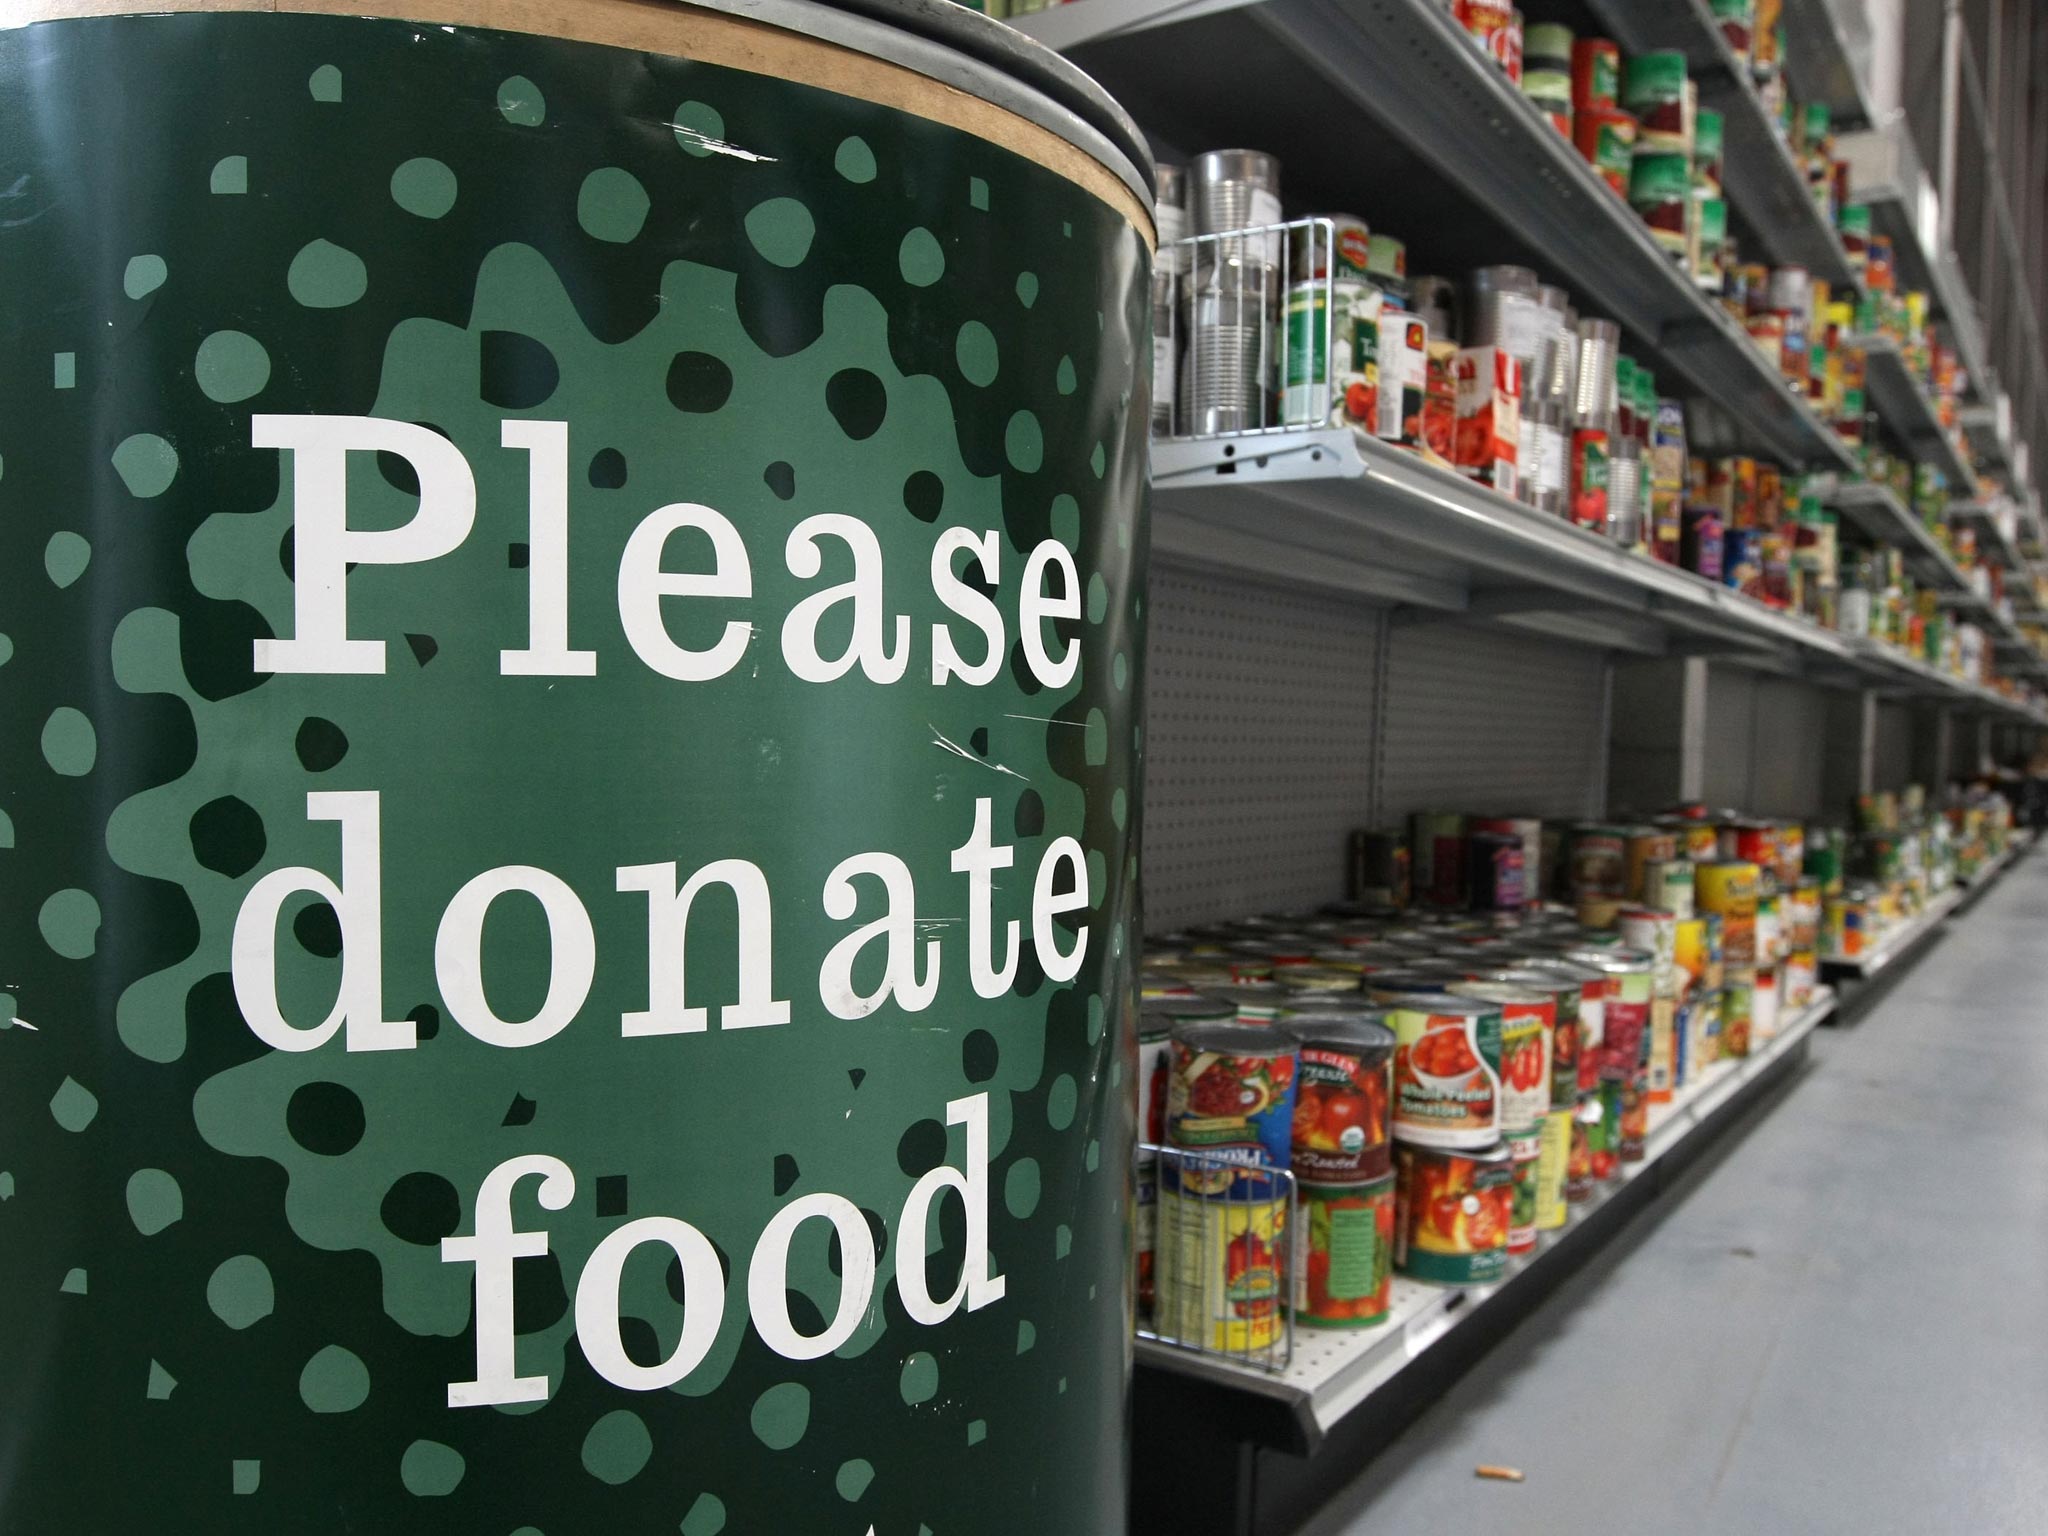 The majority of food bank users surveyed were there as a last-resor